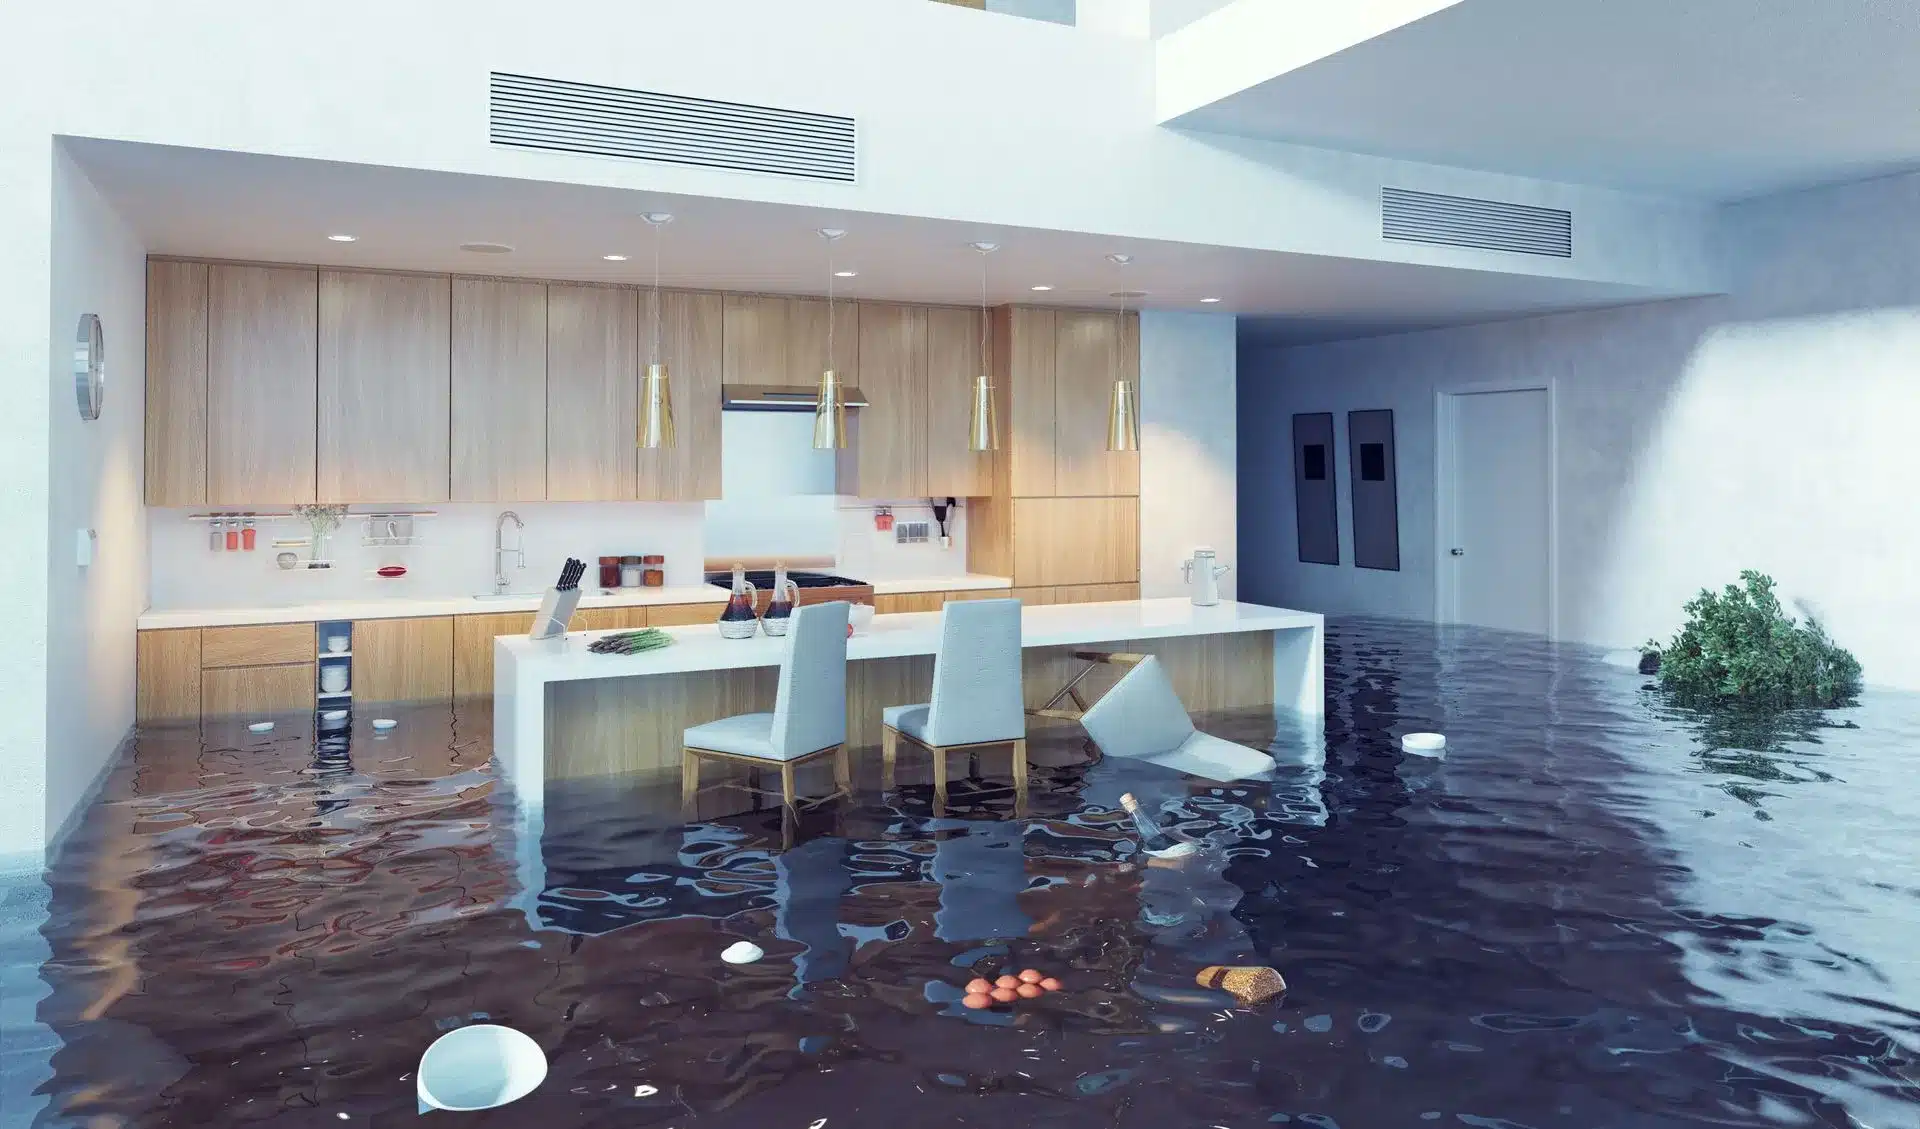 Essential Steps to Take When Your Property Sustains Water Damage